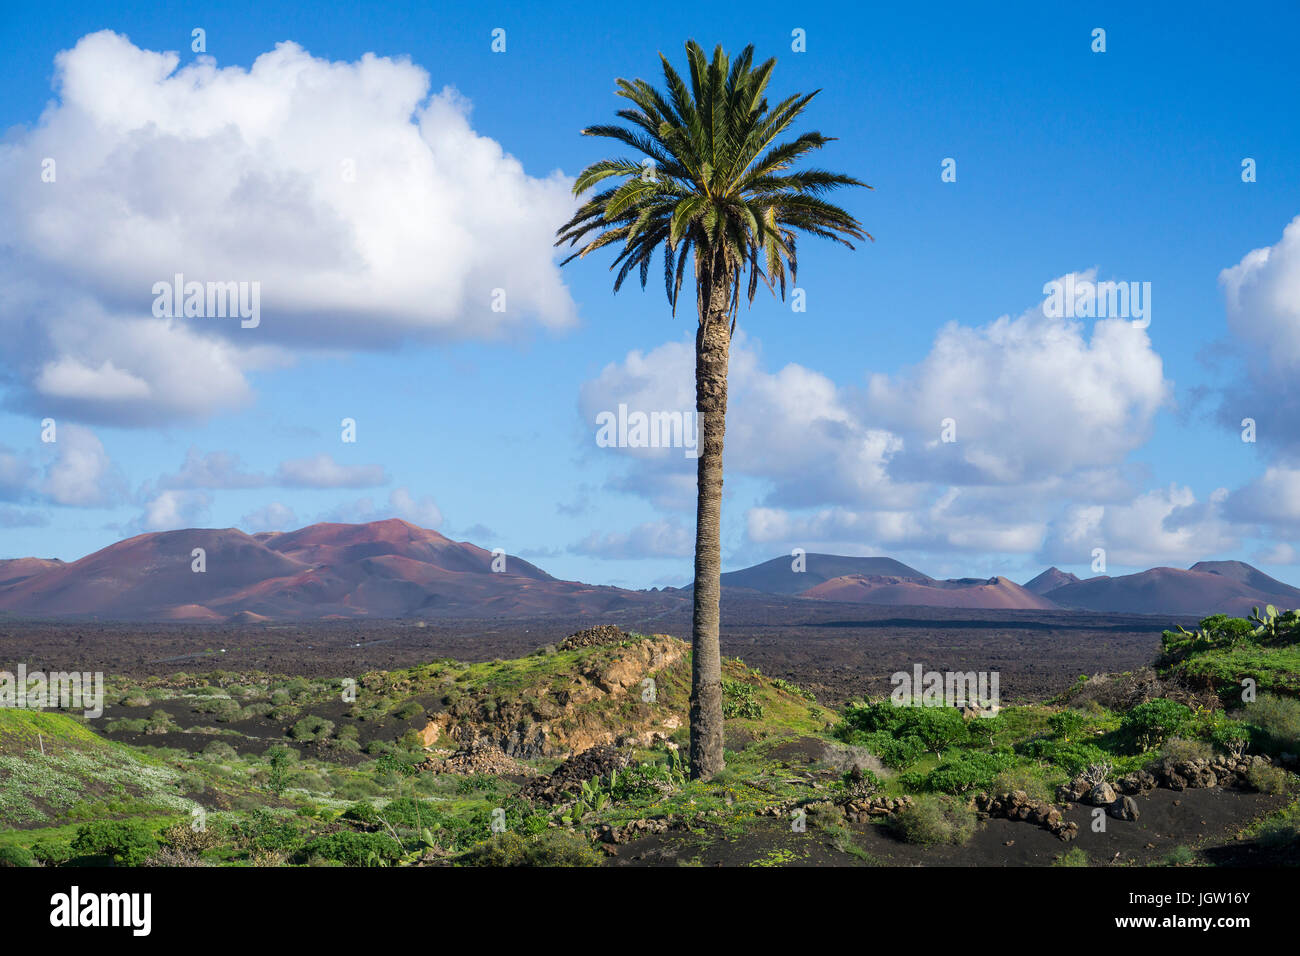 Volcanic landscape between Yaiza and Uga, behind the fire mountains Montanas del Fuego, Nationalpark Timanfaya, Lanzarote, Canary islands, Europe Stock Photo